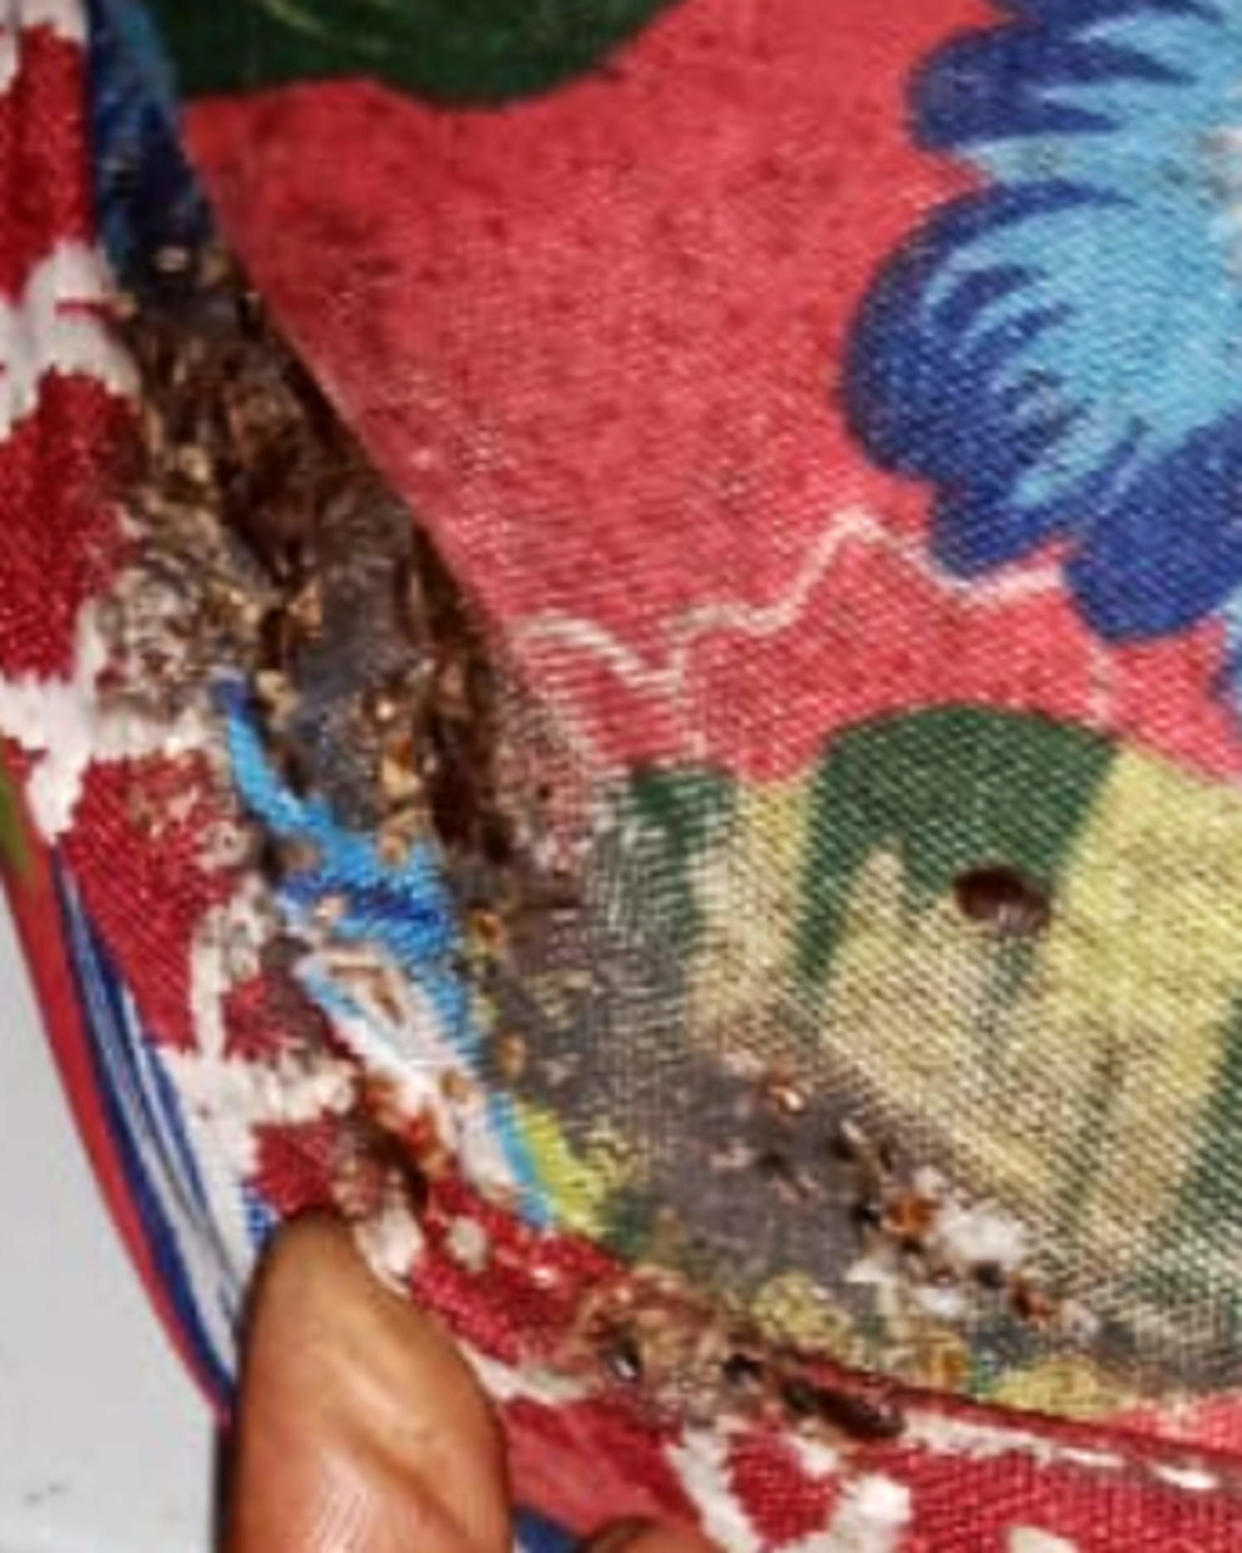 A mattress that appears to be covered in bedbugs. (Courtesy Joshua Farinella)